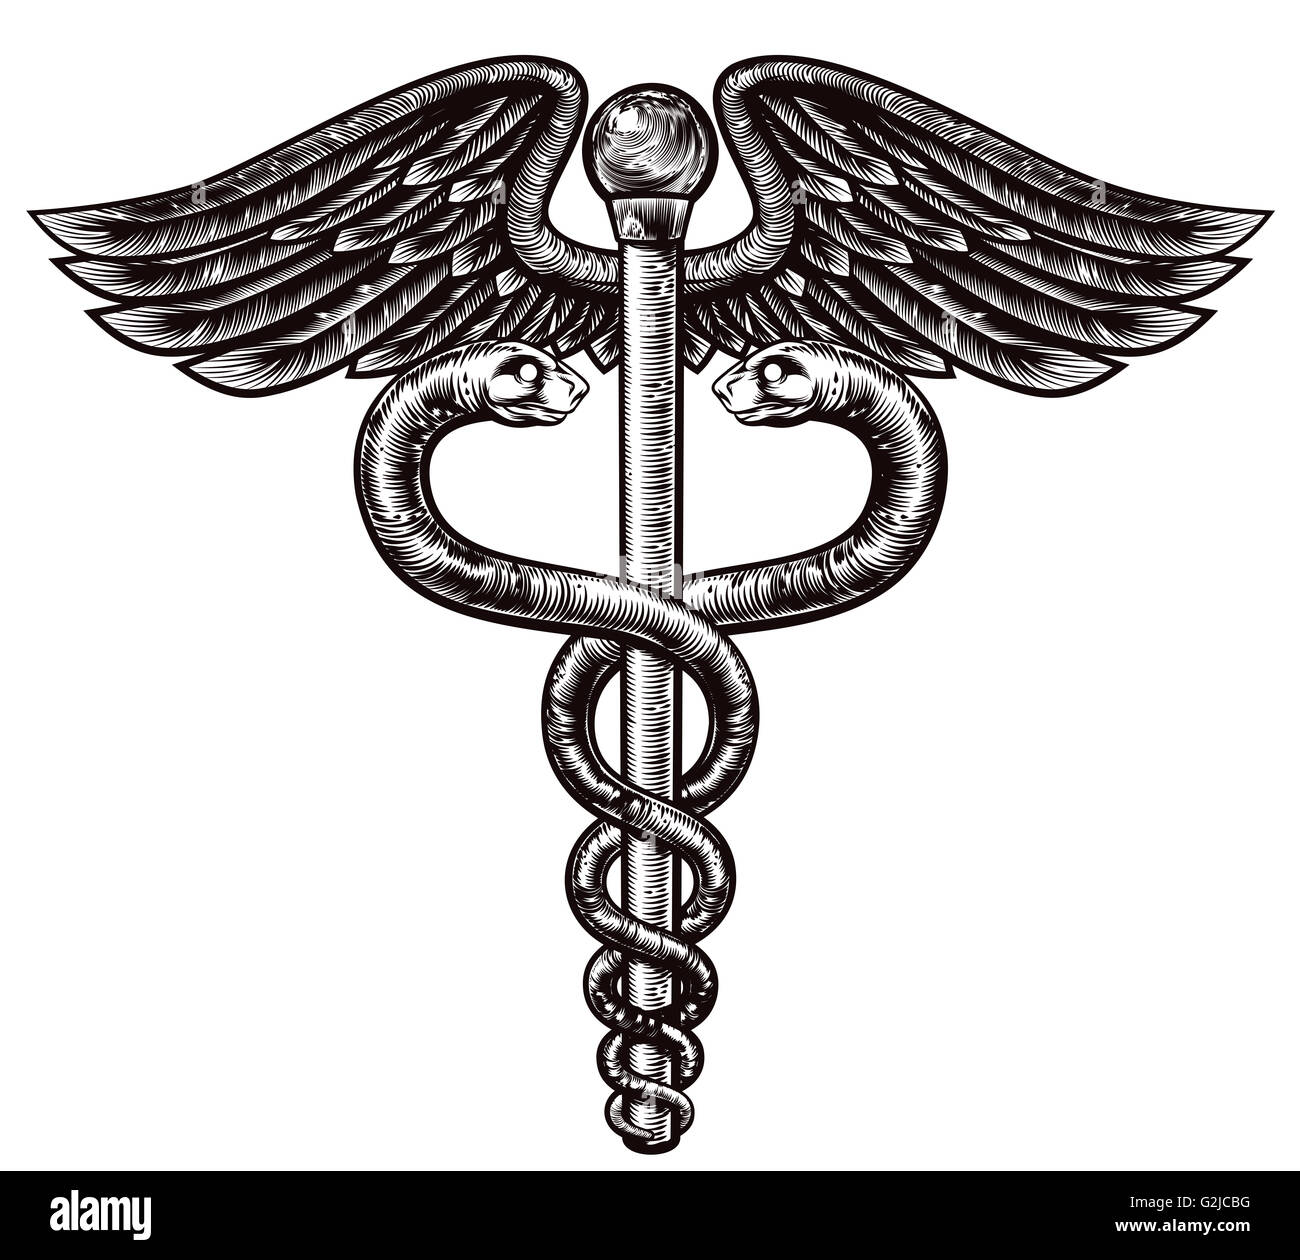 An illustration of the caduceus symbol of two snakes intertwined Stock